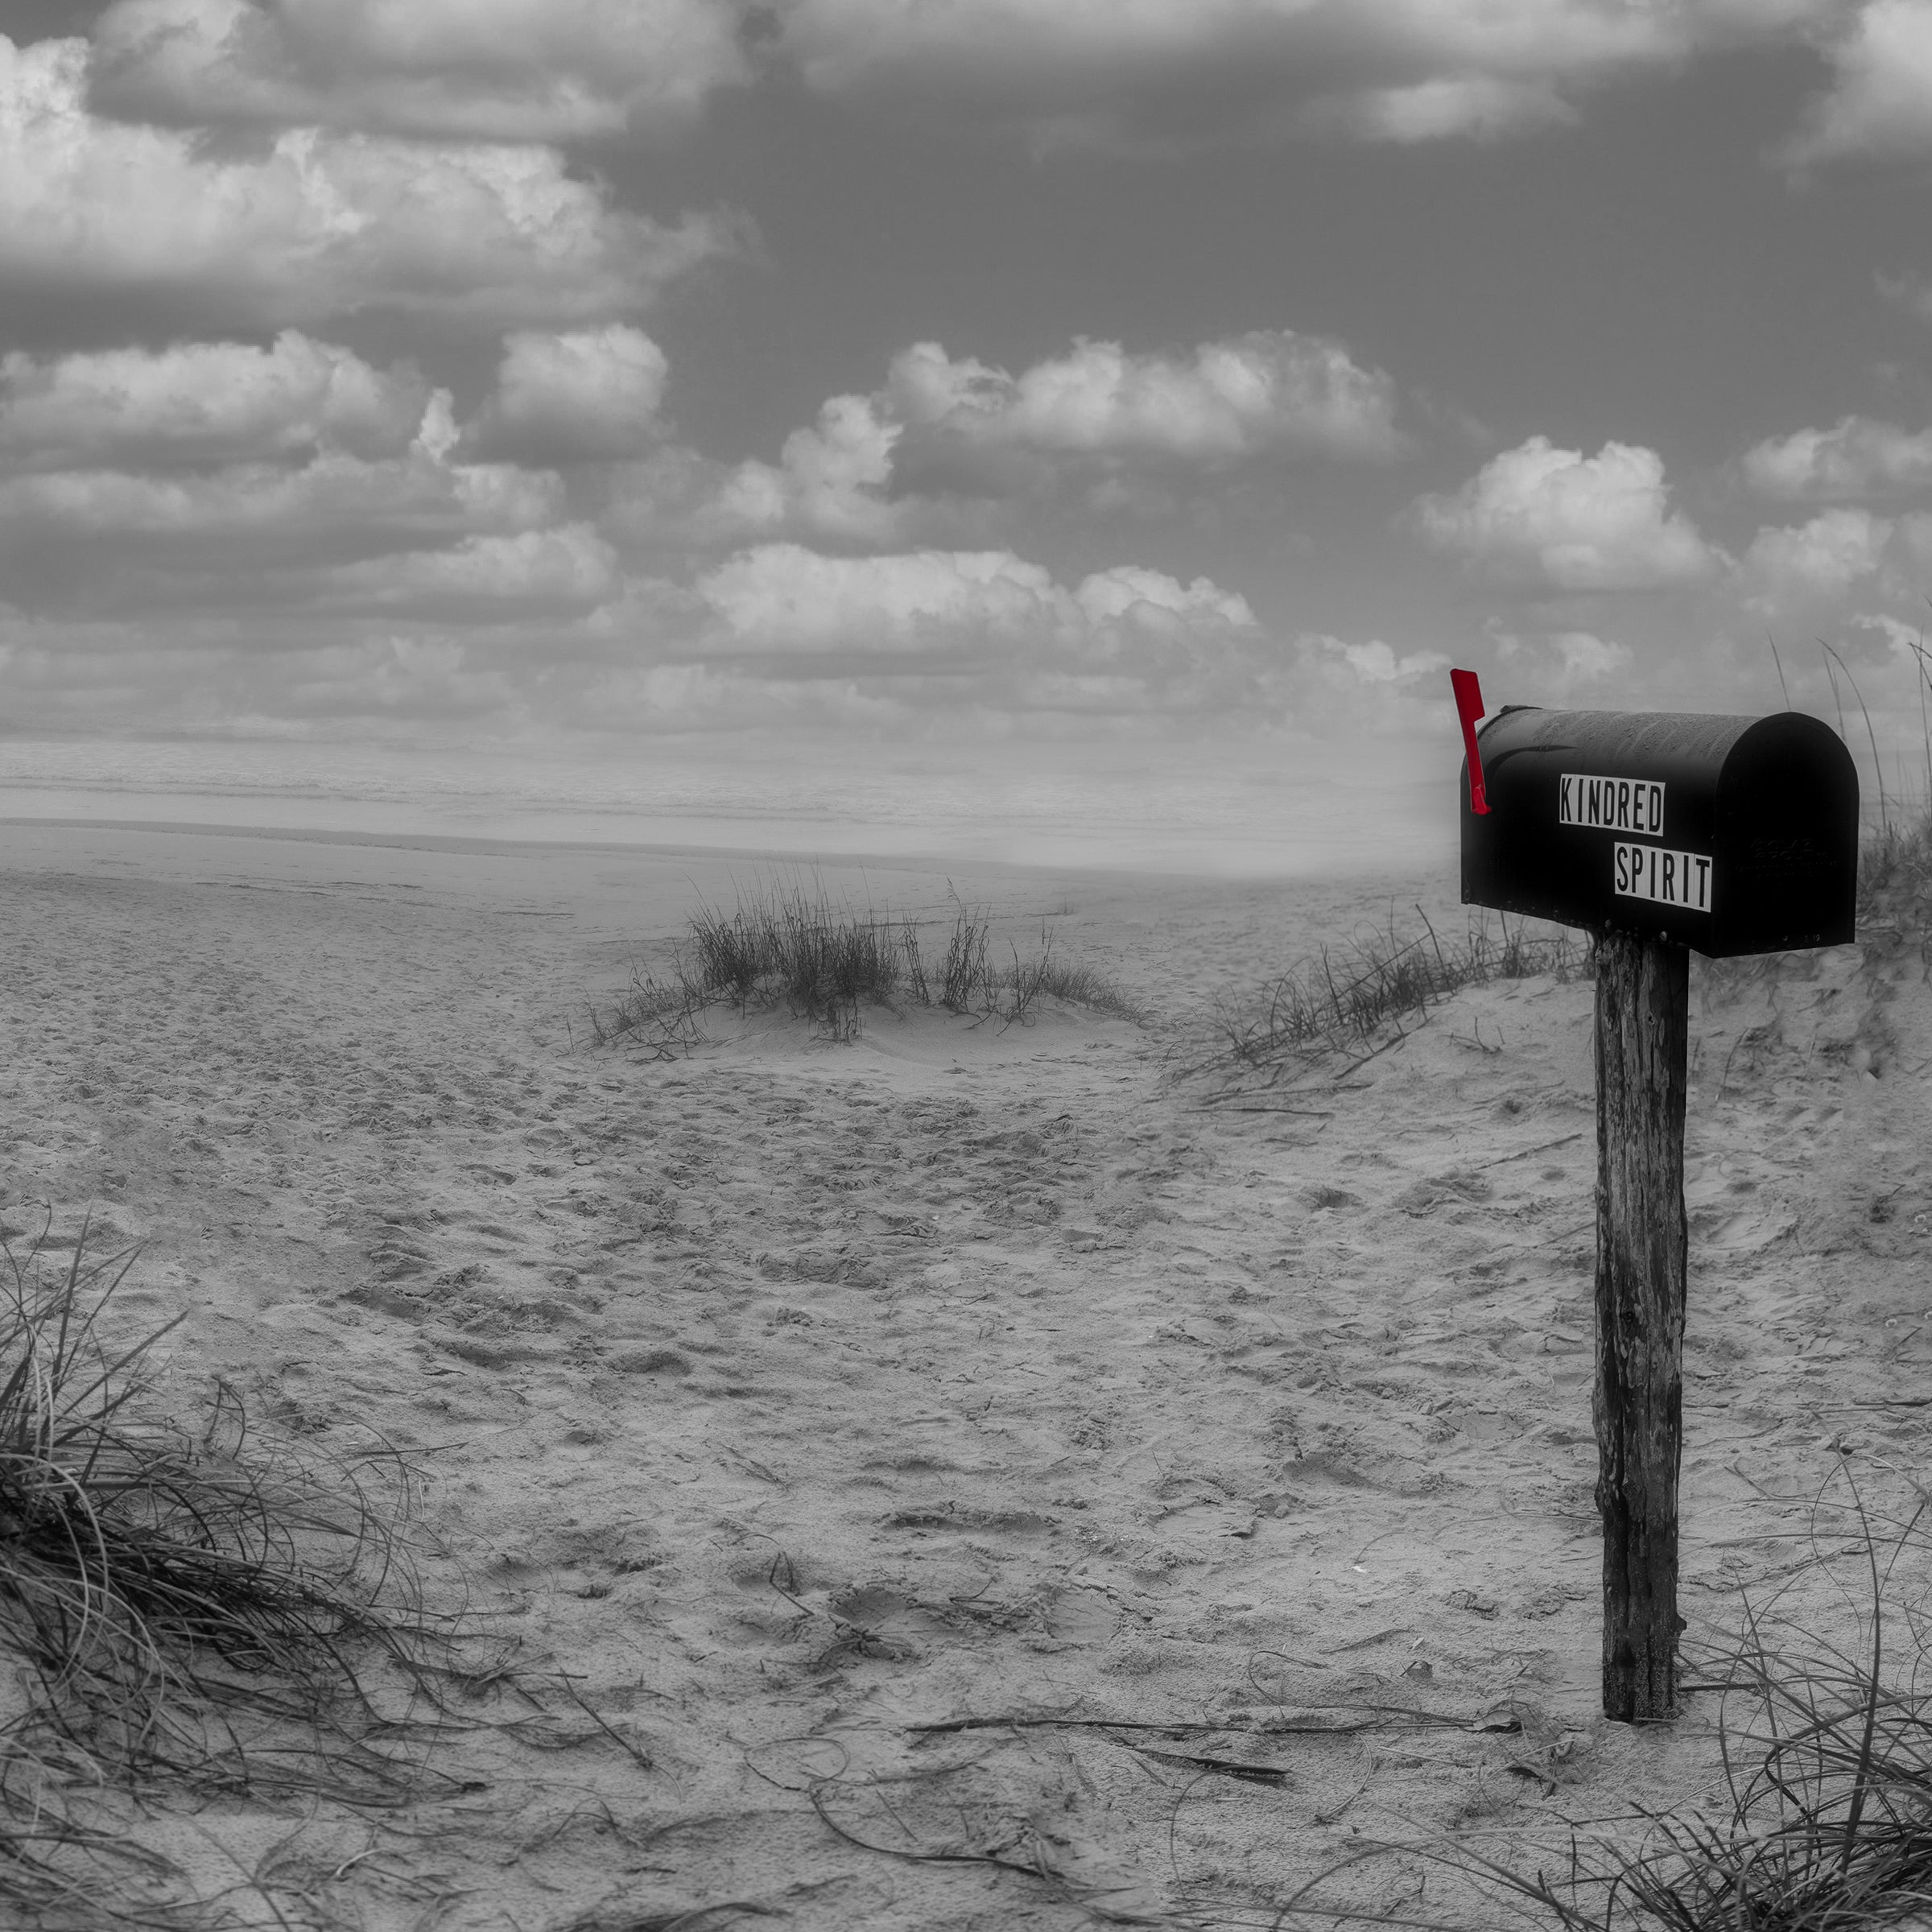 A mailbox on the beach with a label on the side that reads "Kindred Spirit".  Clouds in the sky and a beach background.  The mailbox is not associated with a house but contains journals written by beach goers